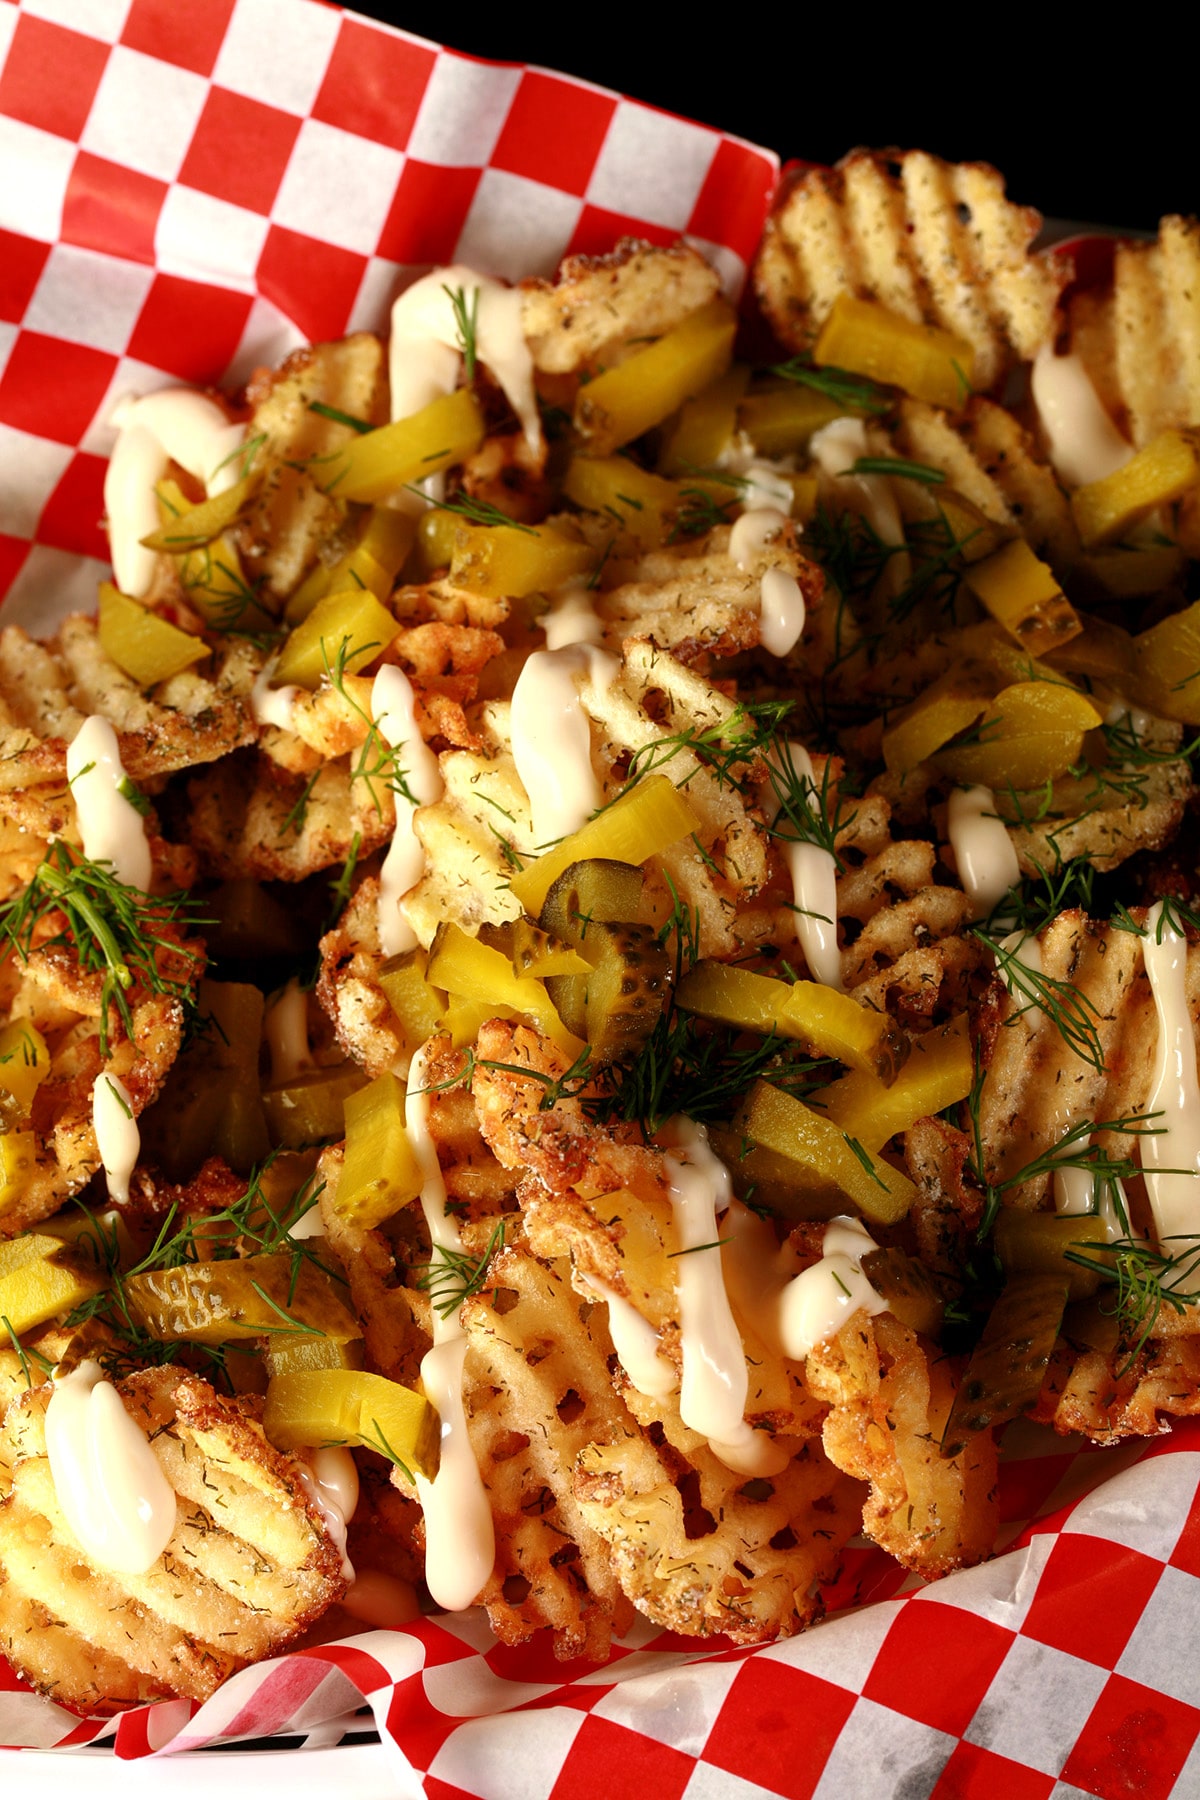 Dill Pickle waffle fries, in a white basket lined with red and white checkered paper. The fries are drizzled with roasted garlic aioi and topped with chopped dill and chopped pickles.